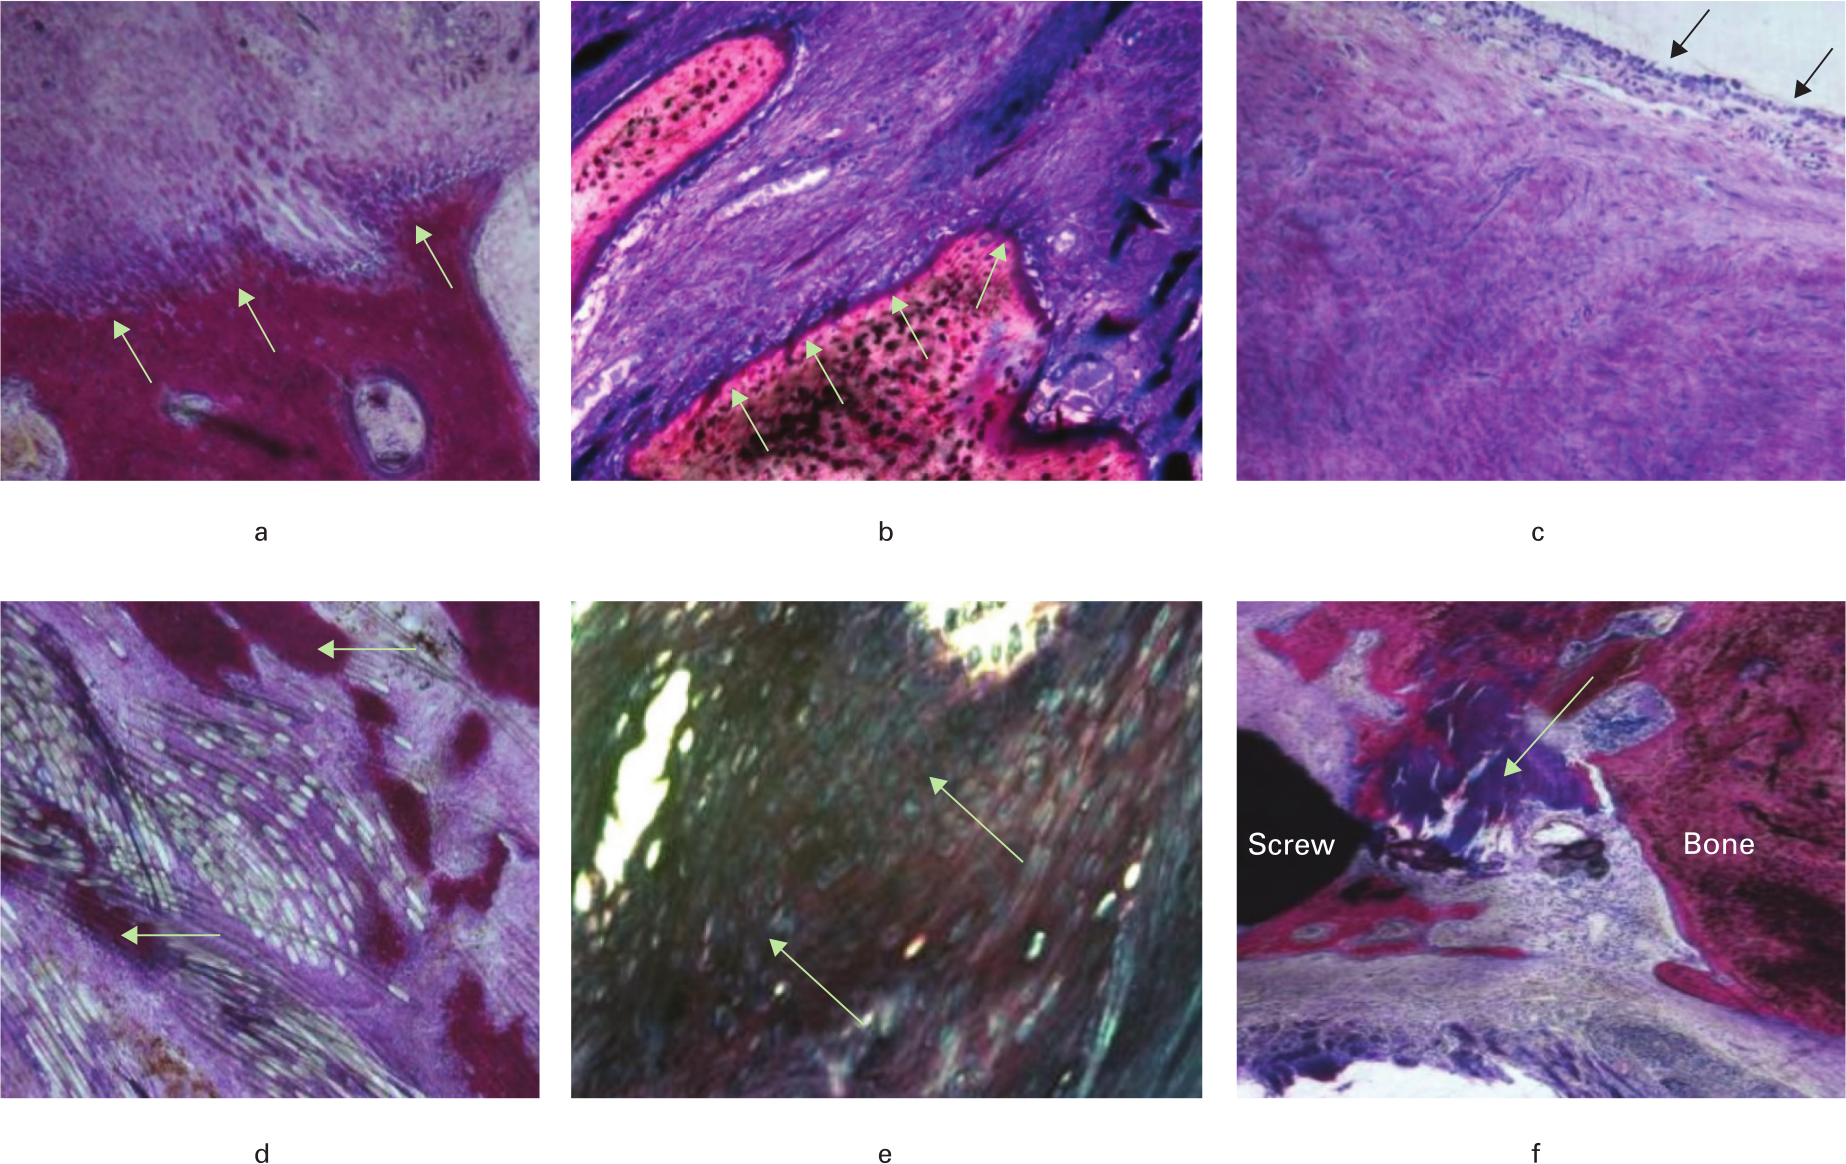 Fig. 6 
            Histological findings in the bone tunnels: a) ×100 magnification showing Sharpey's fibres in the femoral tunnel; b) ×100 magnification showing Sharpey's fibres near the tip of tibial screw; c) ×100 magnification showing a synovial membrane-like sheath over remodelled tissue emerging from tibial tunnel; d) ×100 magnification showing bone penetration within Endobutton loop fibres; e) ×200 magnification showing chondrocyte-like cells in the graft distal to the cross-pin device; f) ×100 magnification showing tendon mineralization and ossification between the soft screw and bone tunnel (stained with Toluidine Blue and Paragon).
          